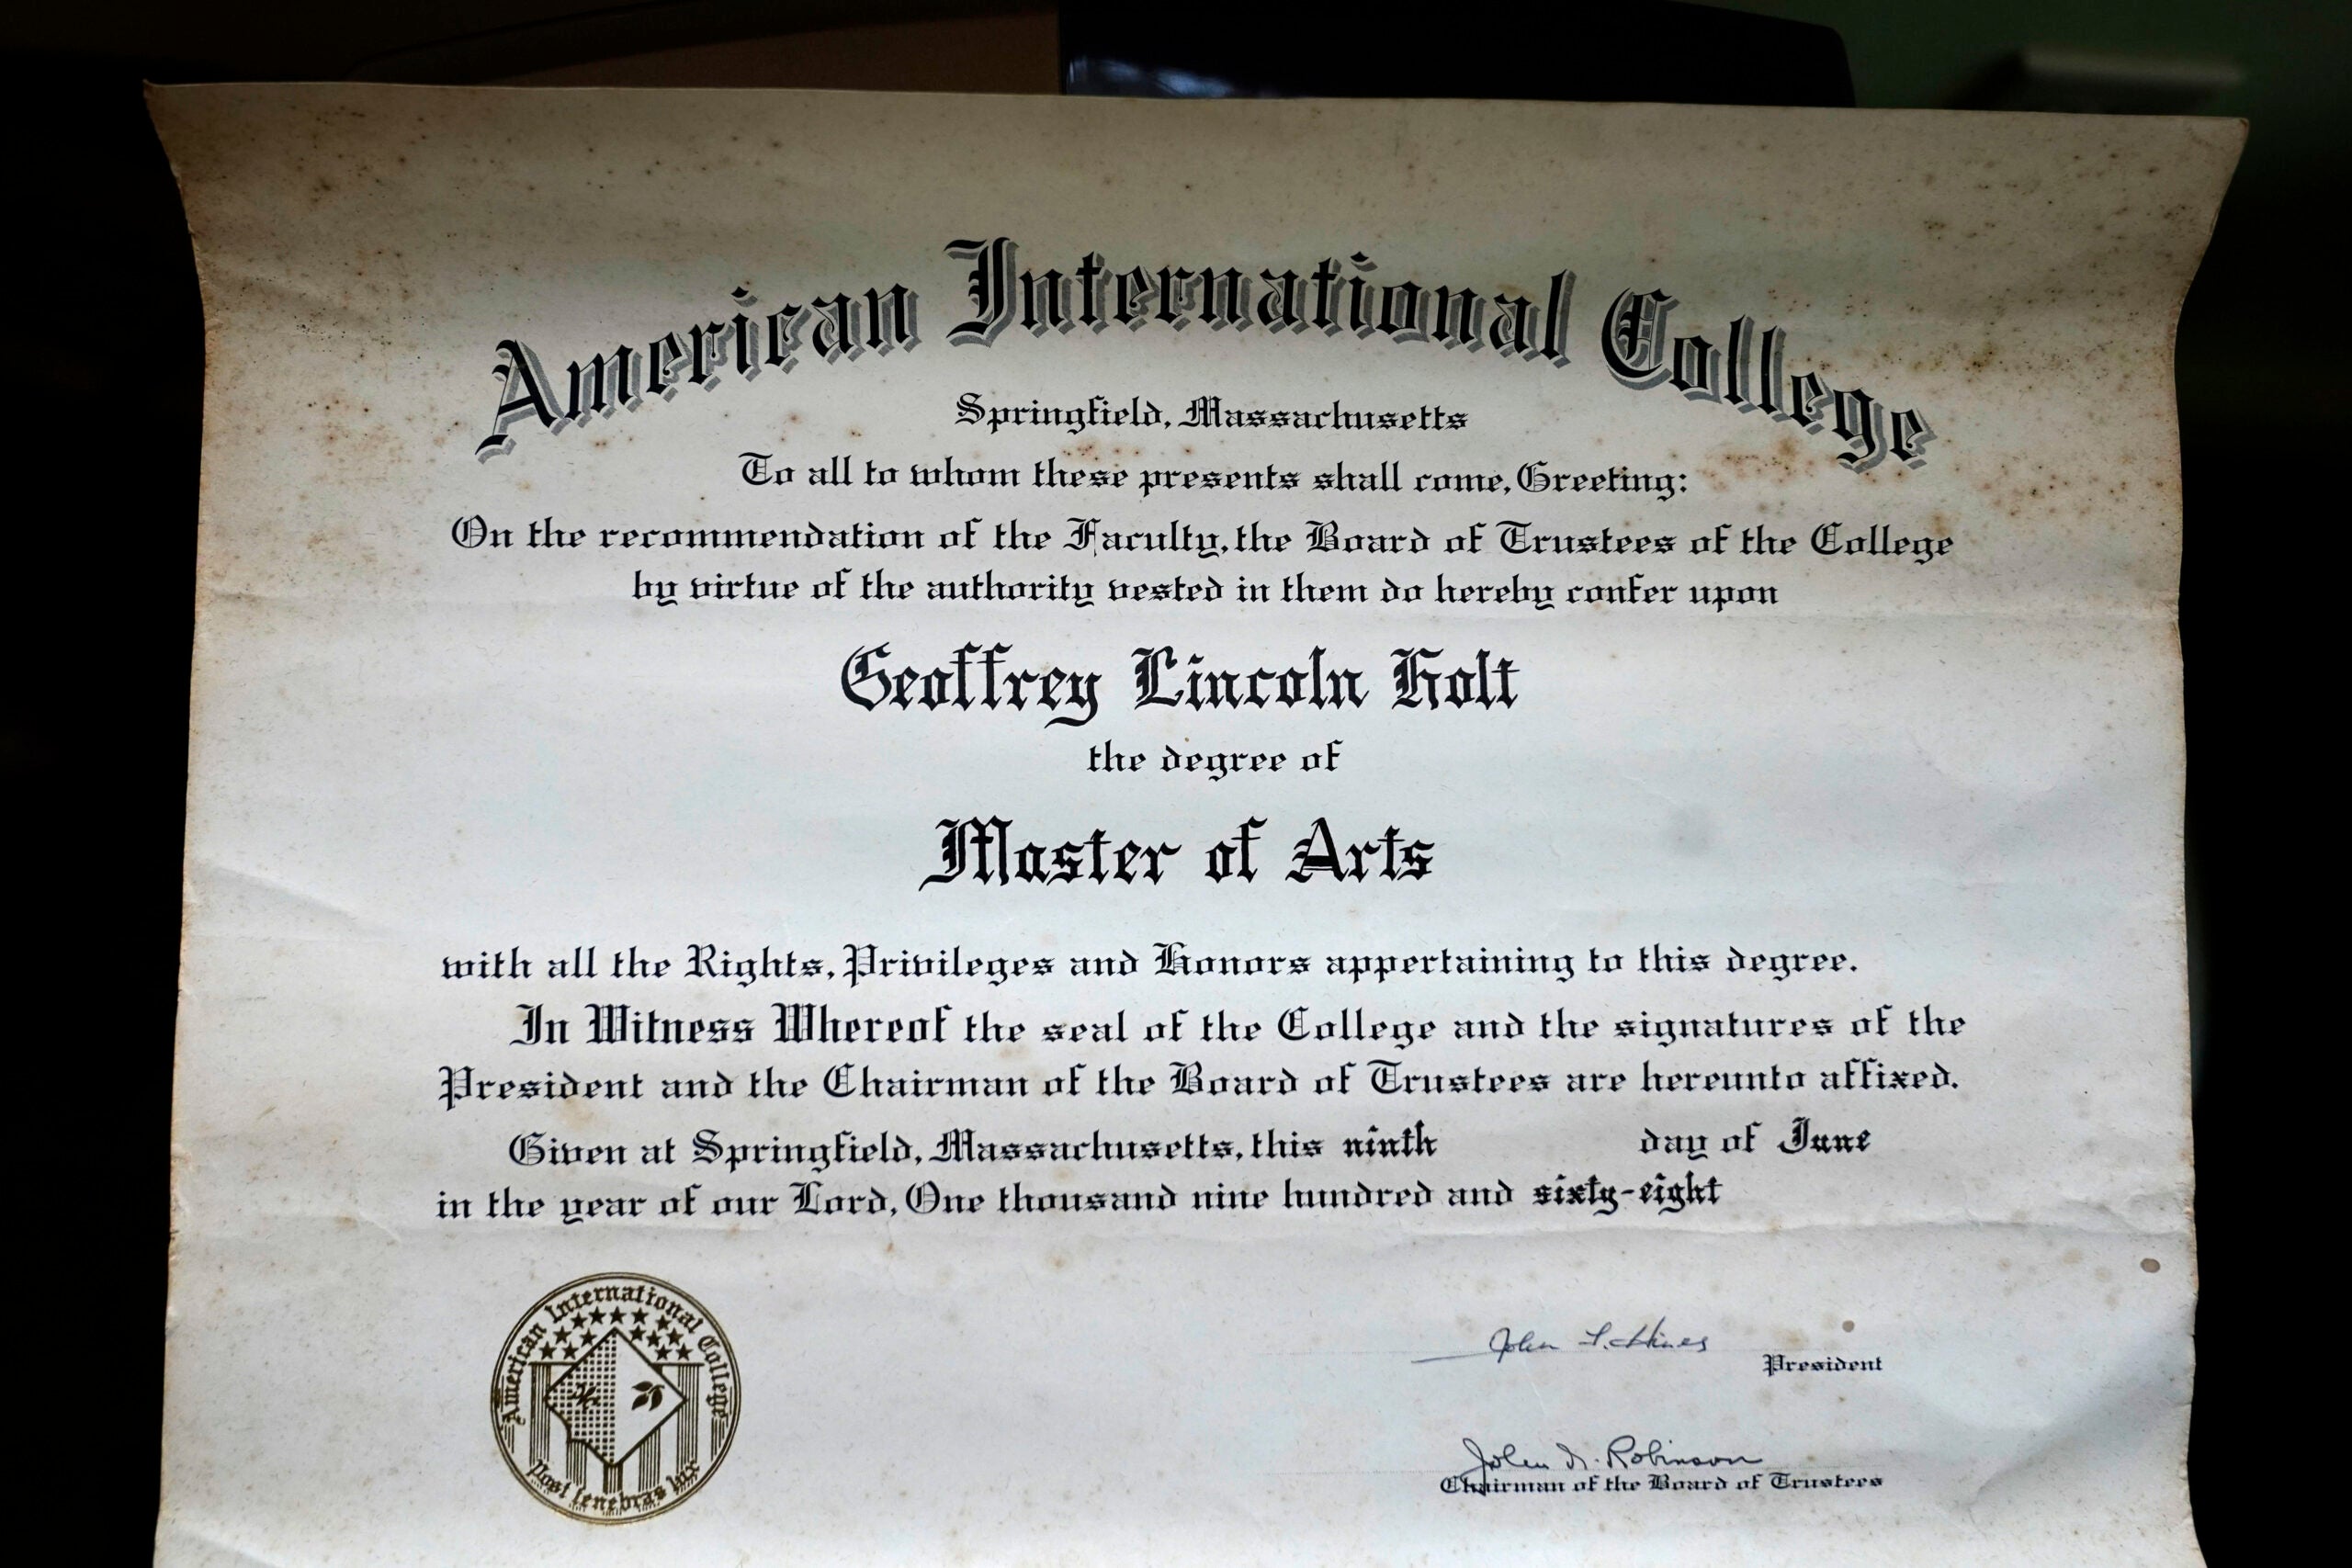 Geoffrey Holt's diploma for earning a Master's degree from American International College.